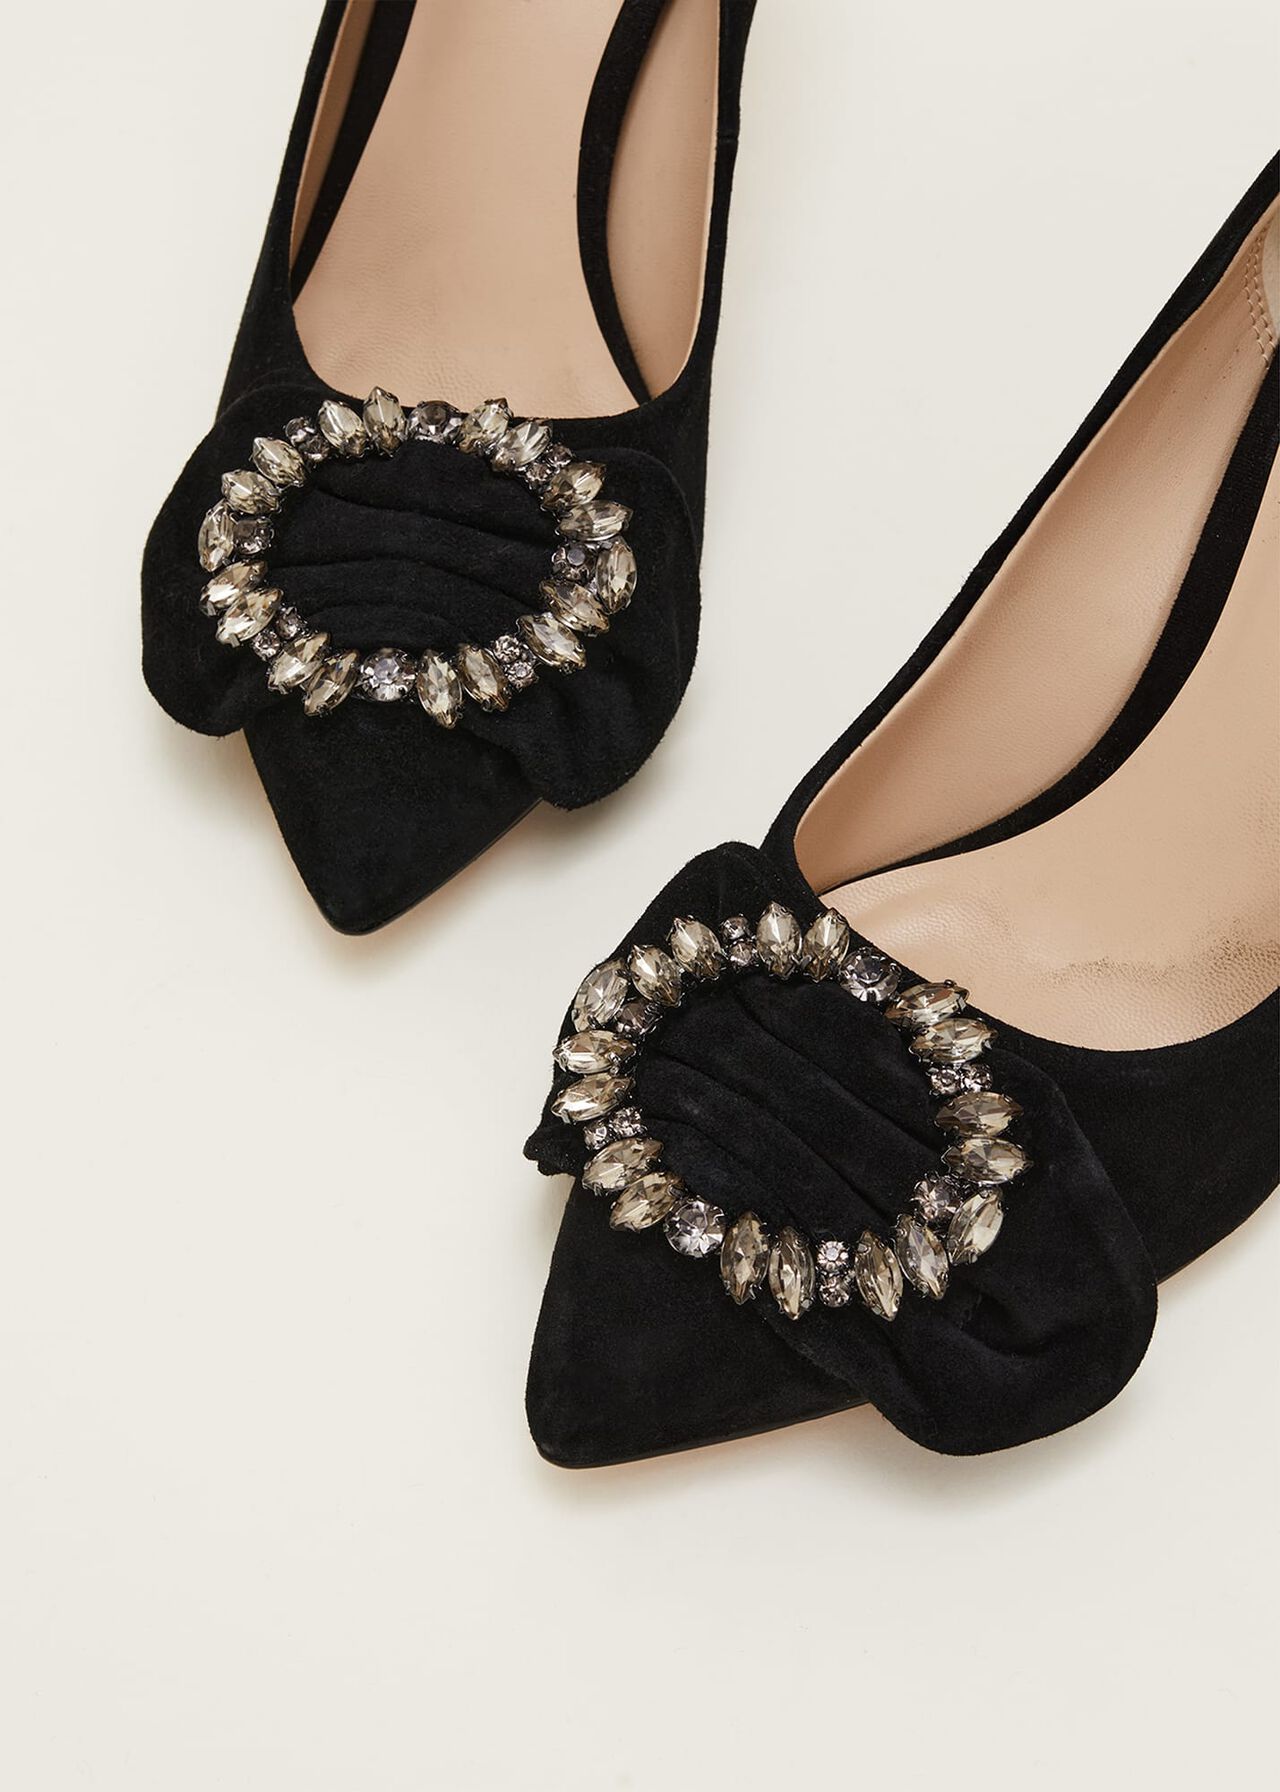 Jewel Front Bow Court Shoe